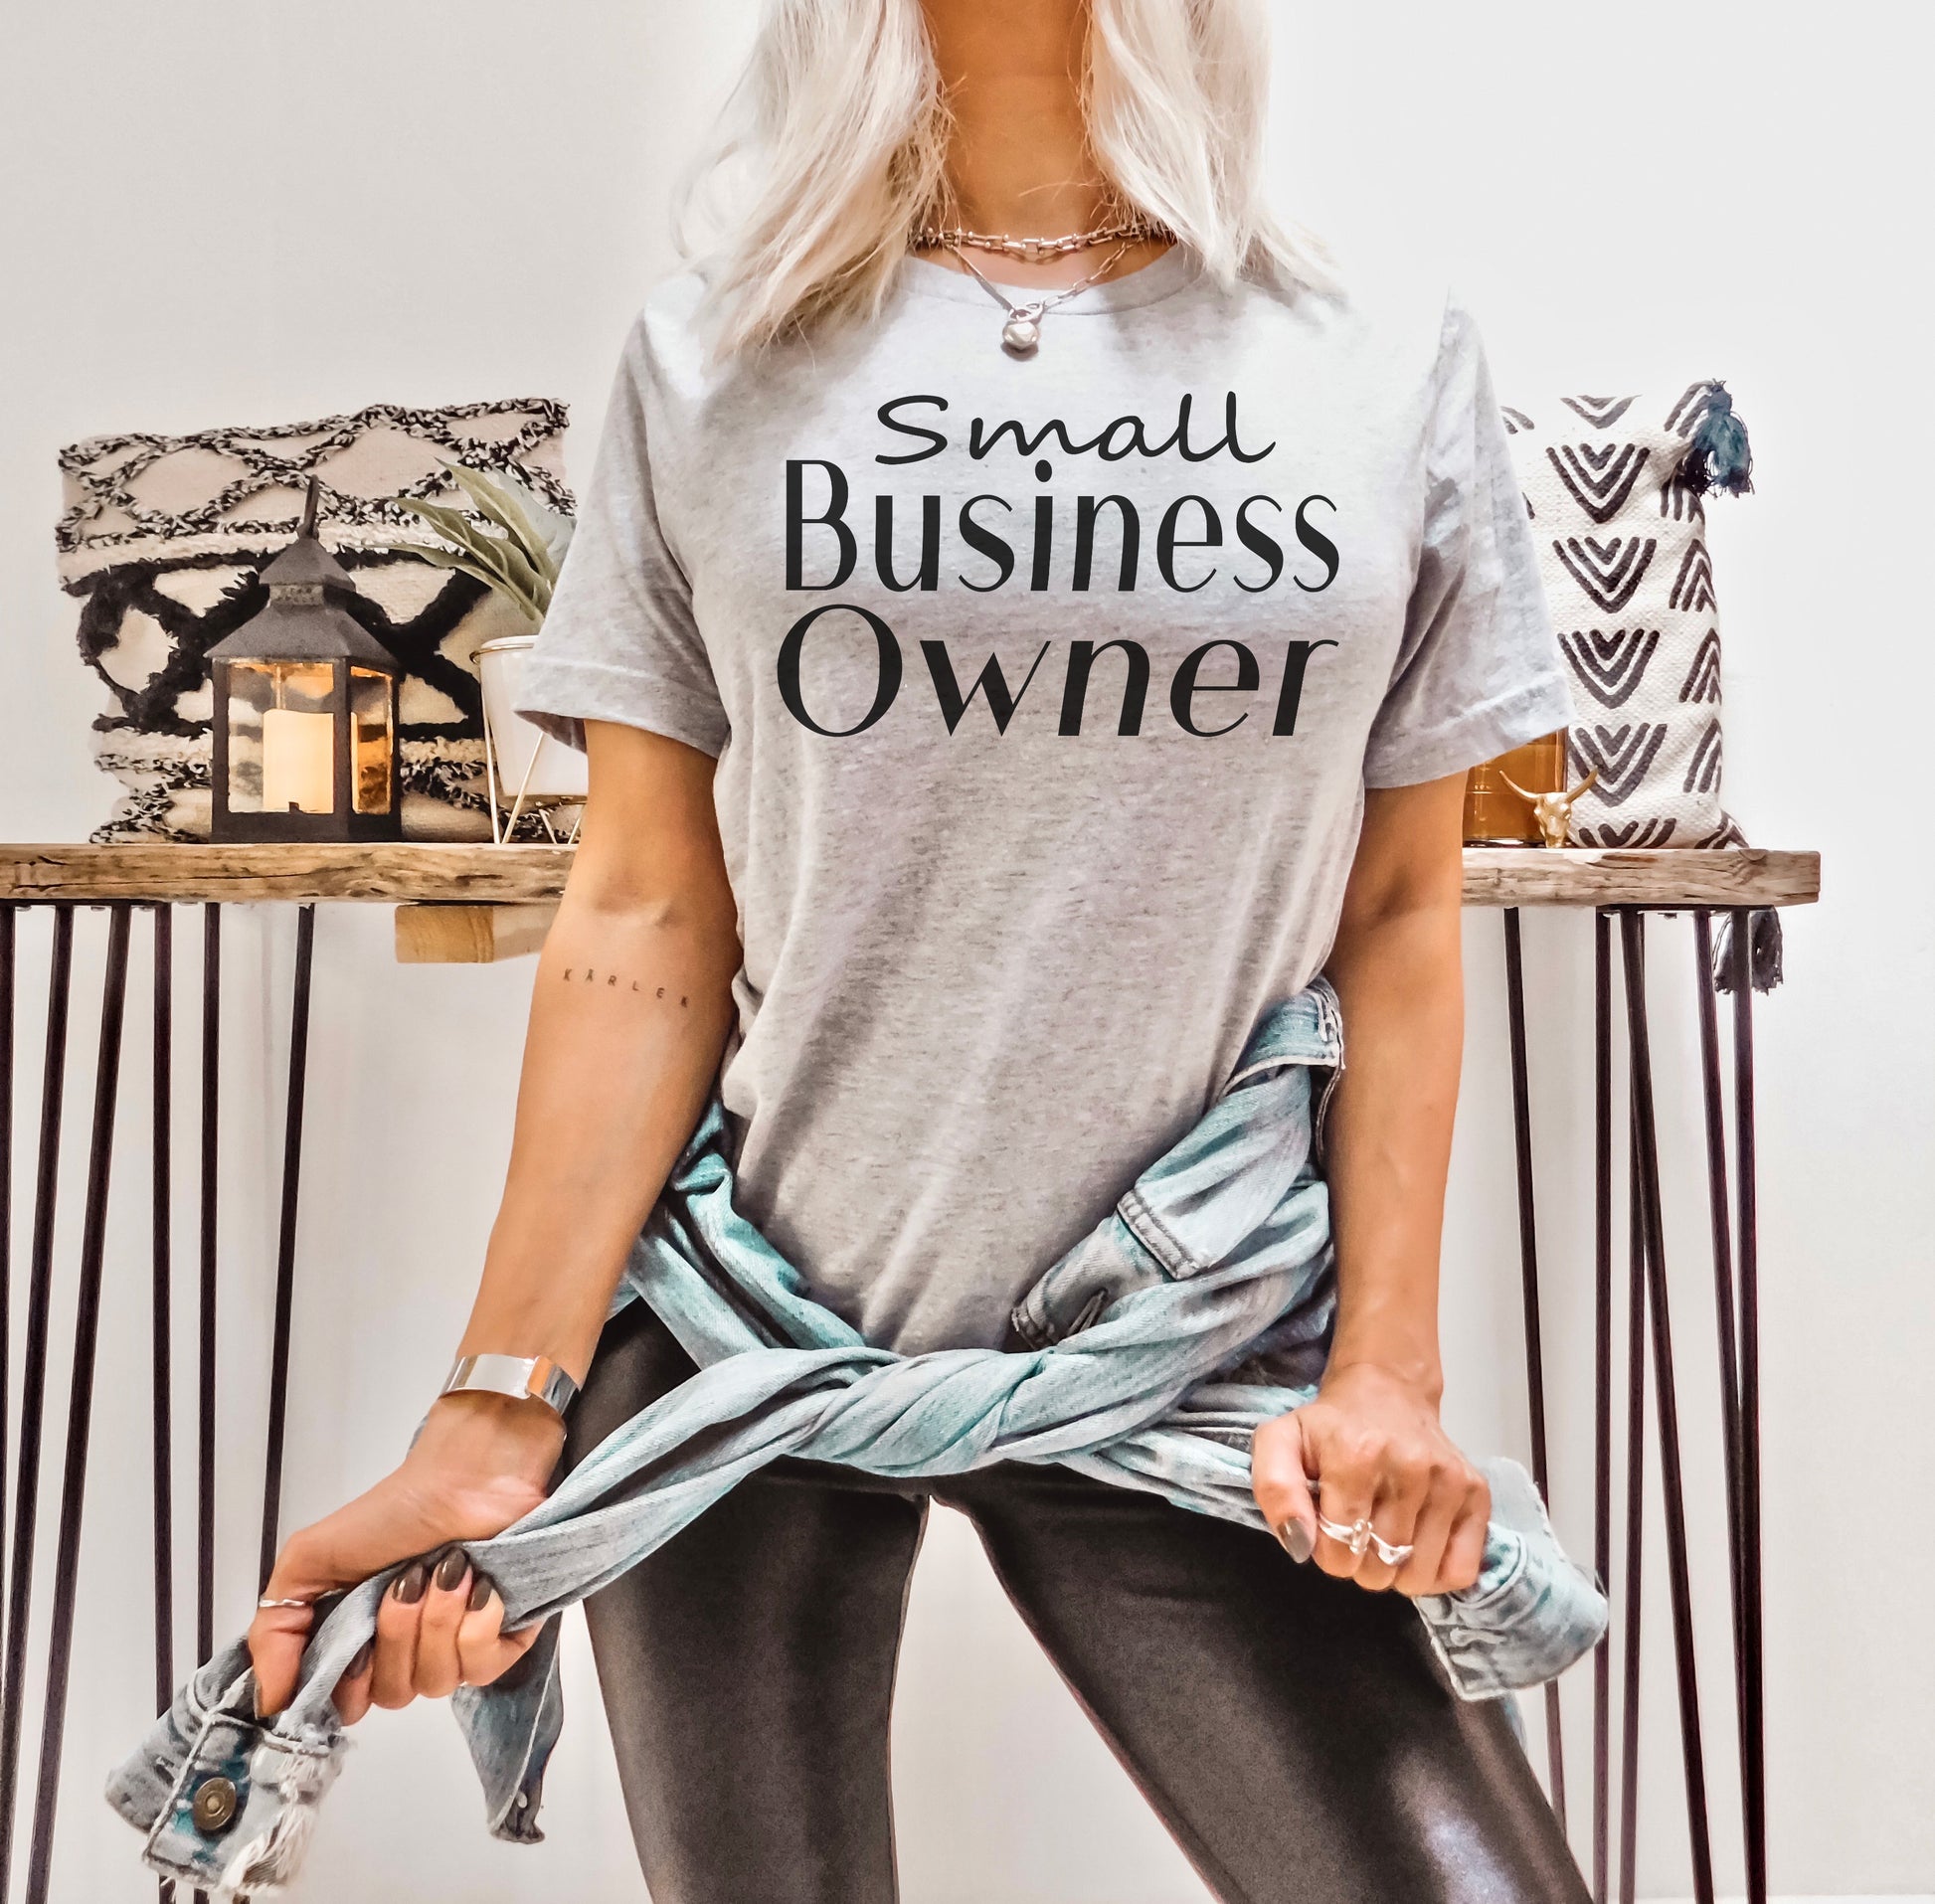 Designs by Prim Small Business Owner Soft Unisex T-Shirt | Building Empire She-EO Hustle Entrepreneur Girl Self Made Paid Hustler Graphic Screen Print Top